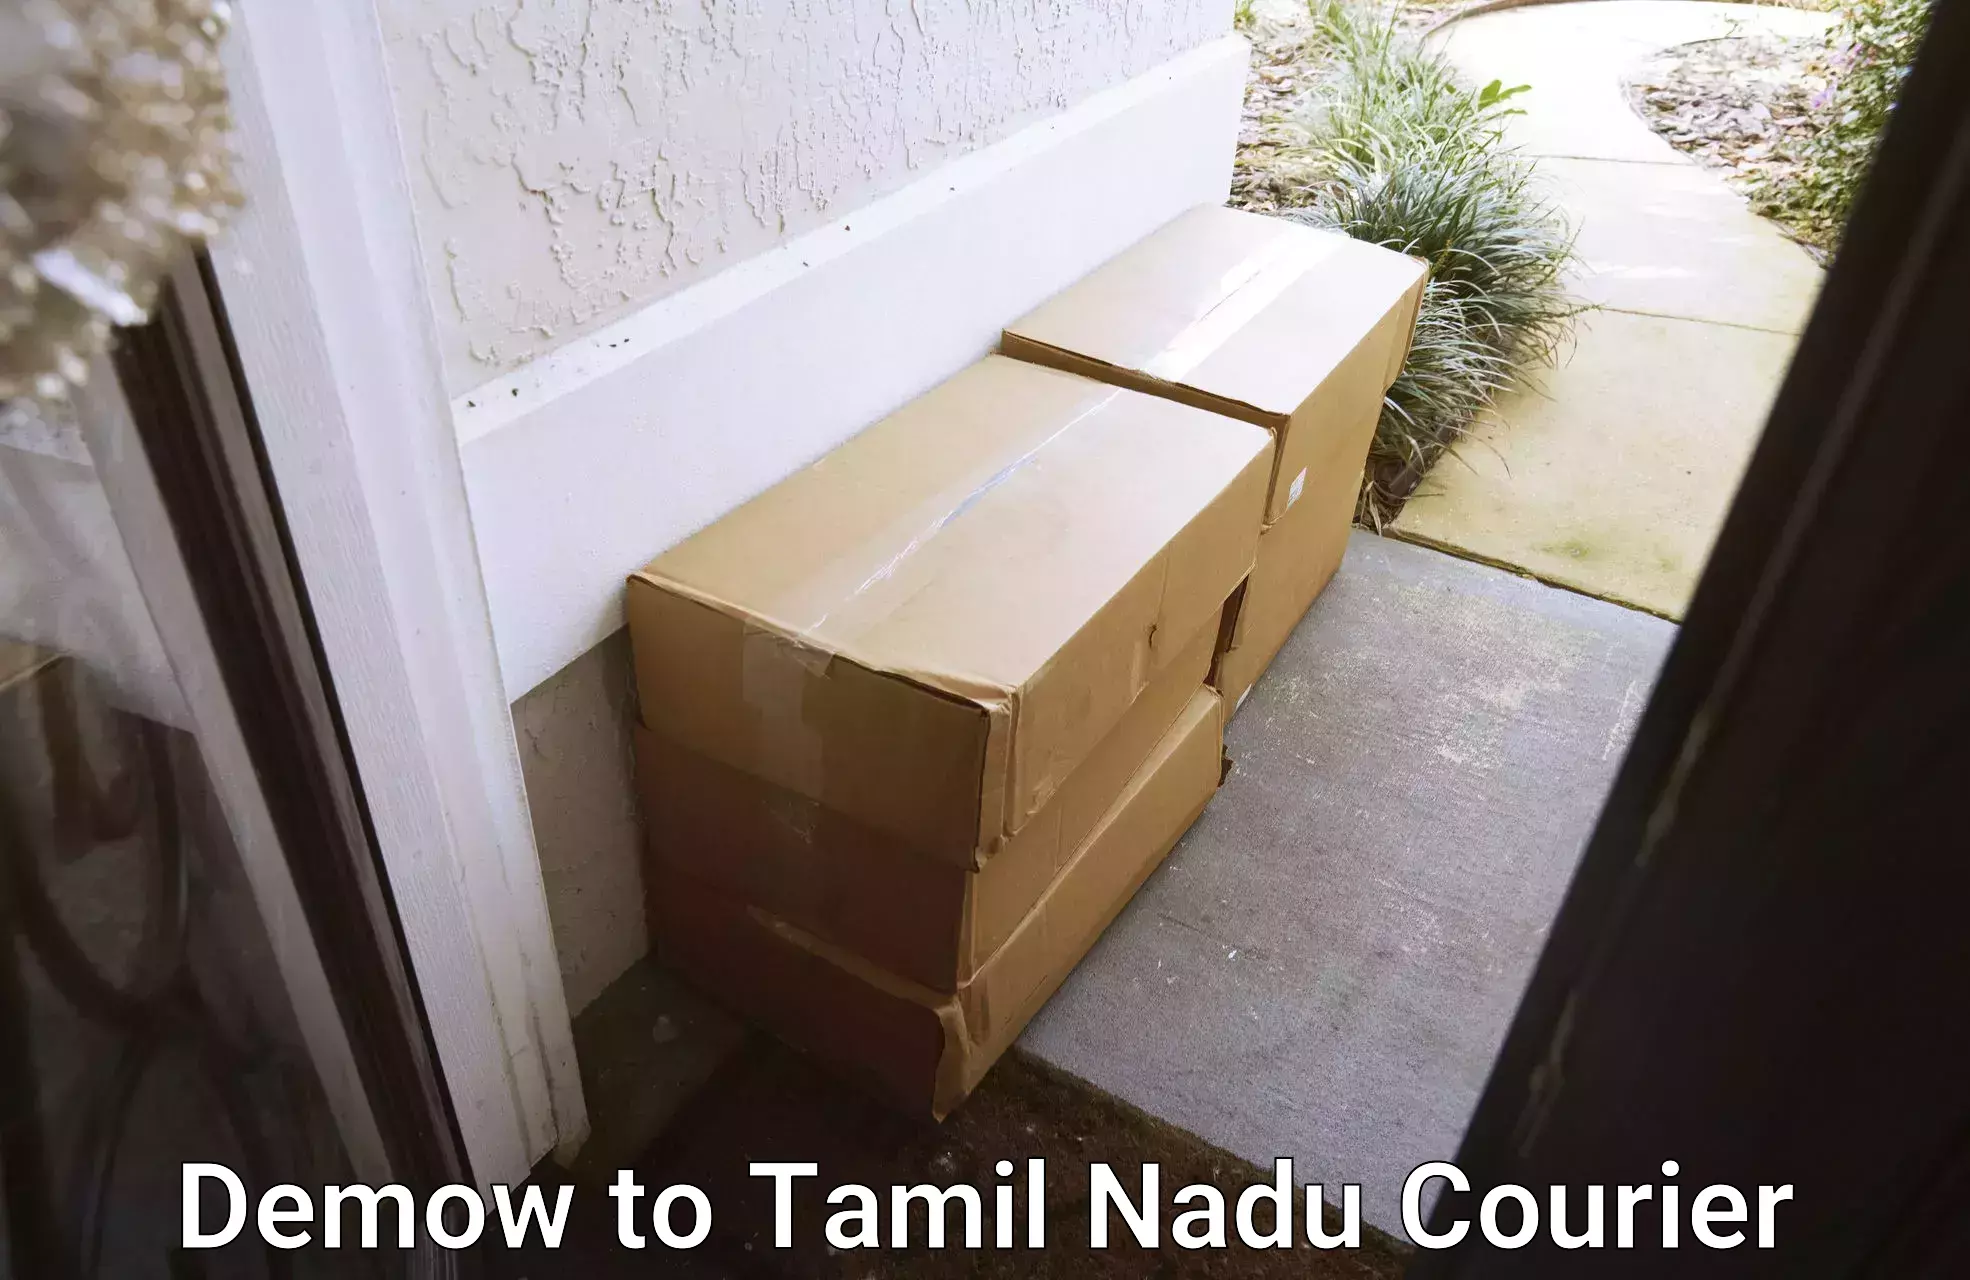 Courier tracking online Demow to Tamil Nadu